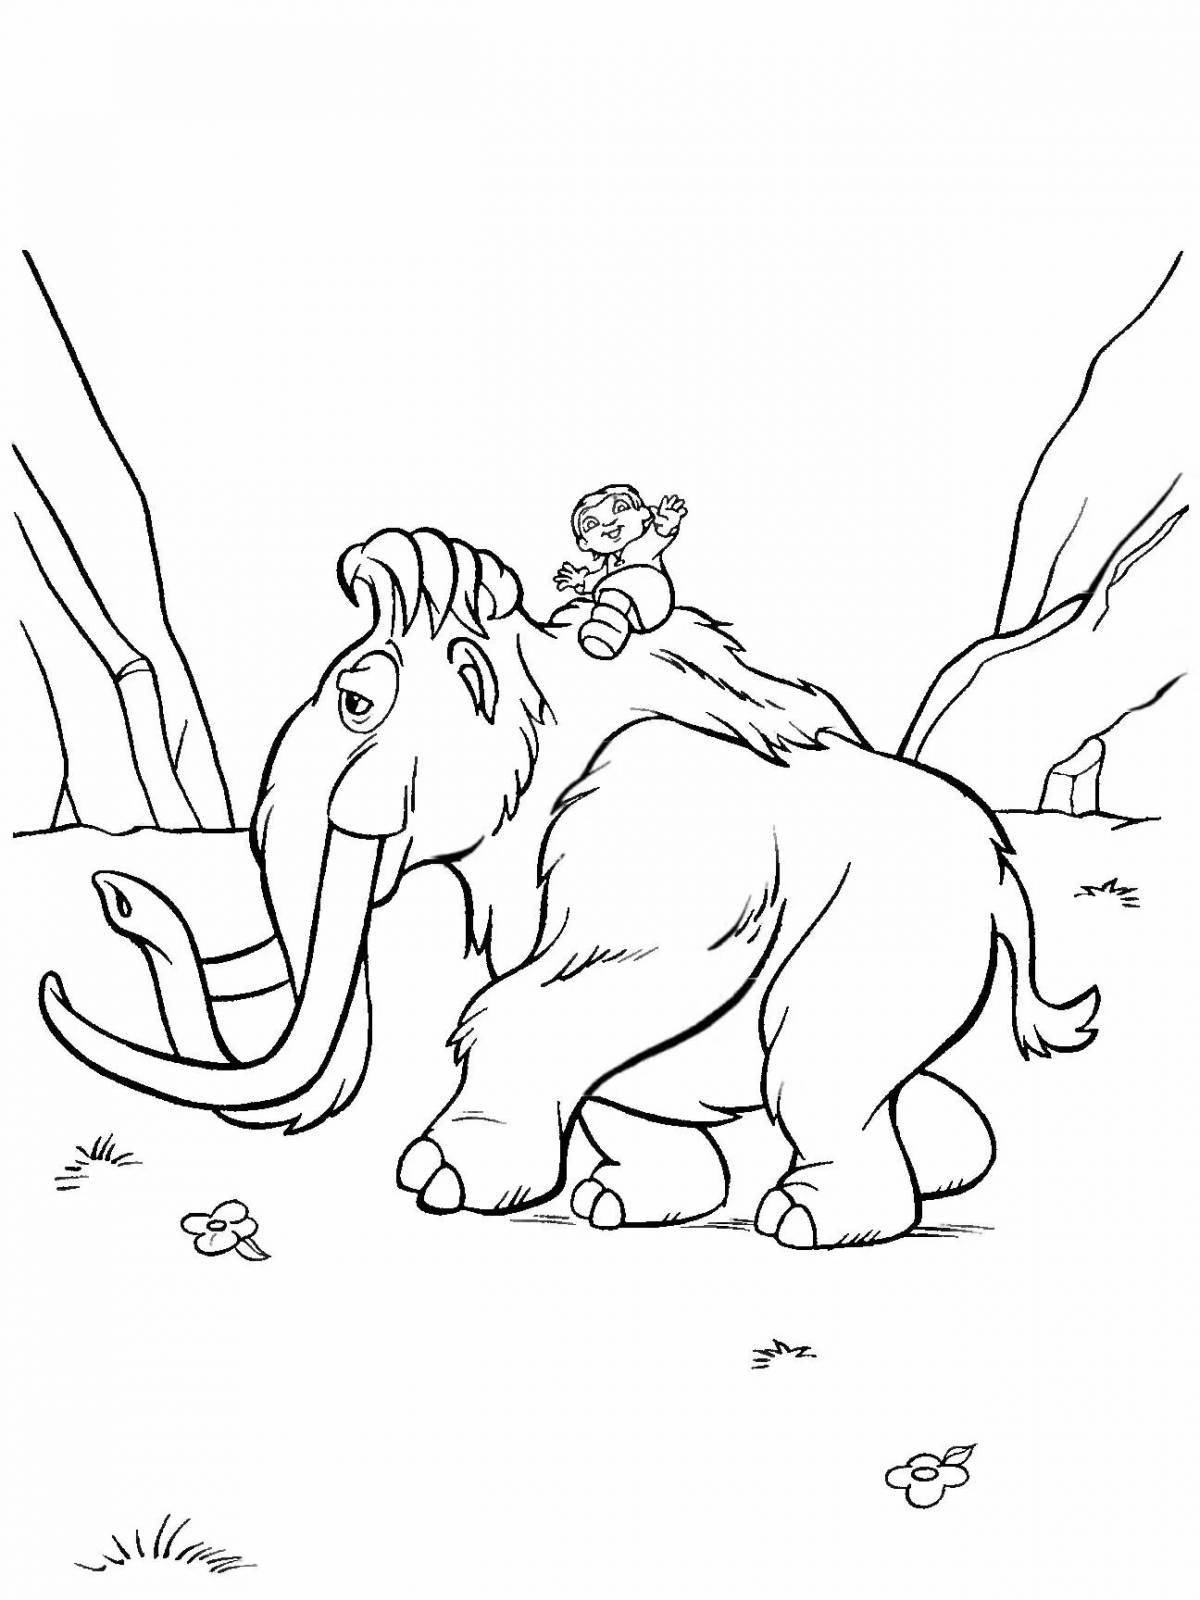 Manny's colorful ice age coloring book